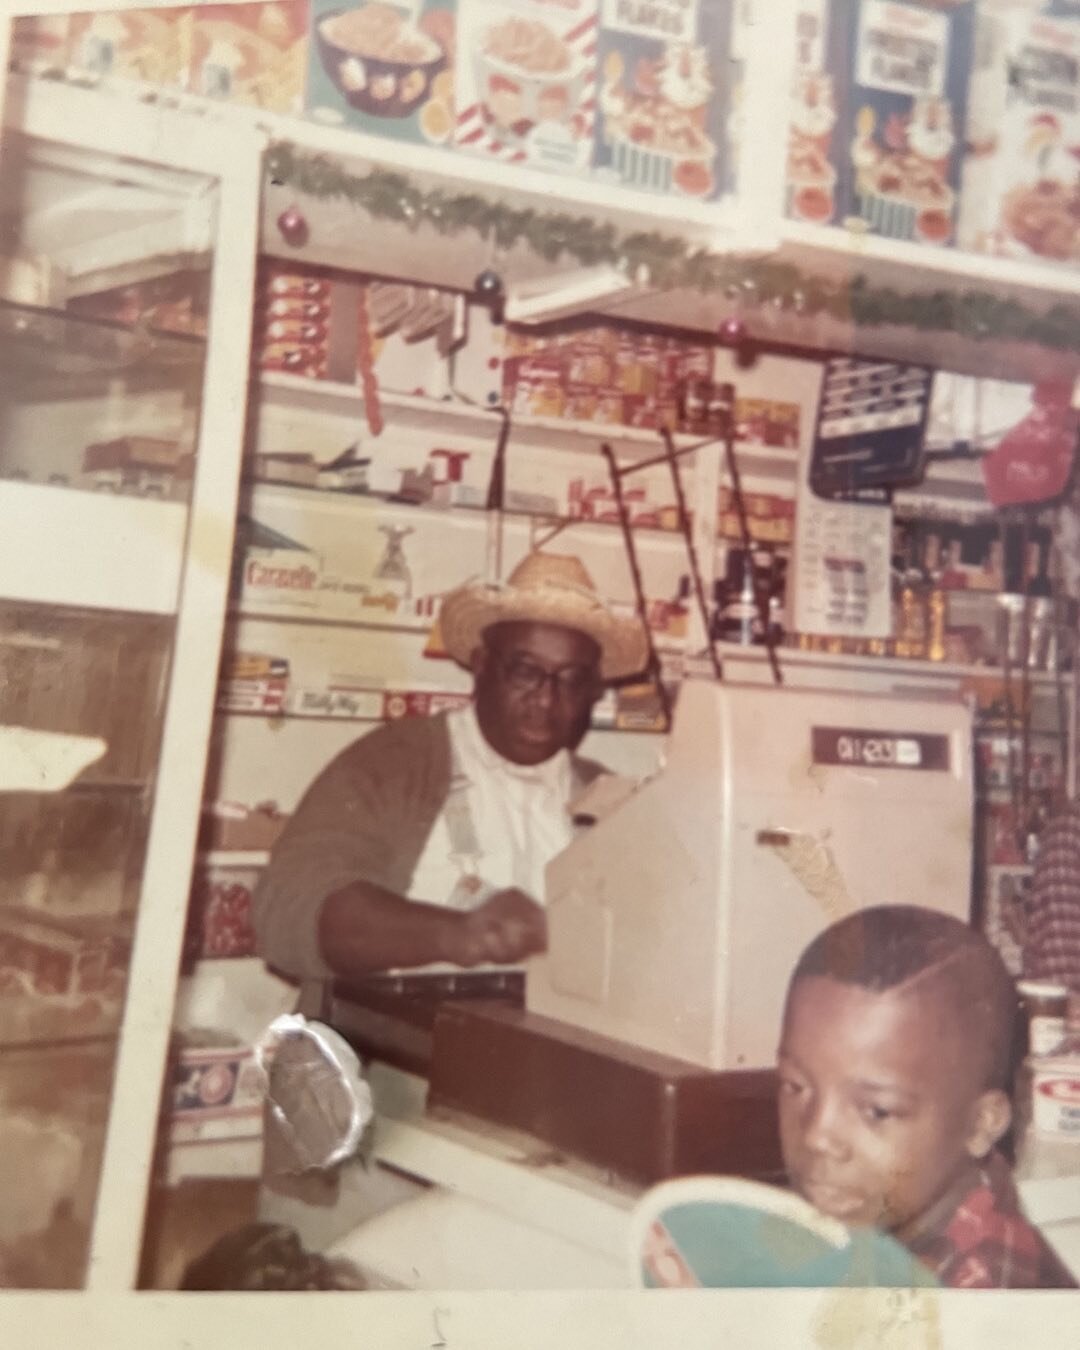 Another #ThrowbackThursday! Sharing these photos with y&rsquo;all makes me so hype about our future. Here is a photo of my great-granddad running the register. 

As I start the rezoning process over, I am being more strategic about how I engage with 